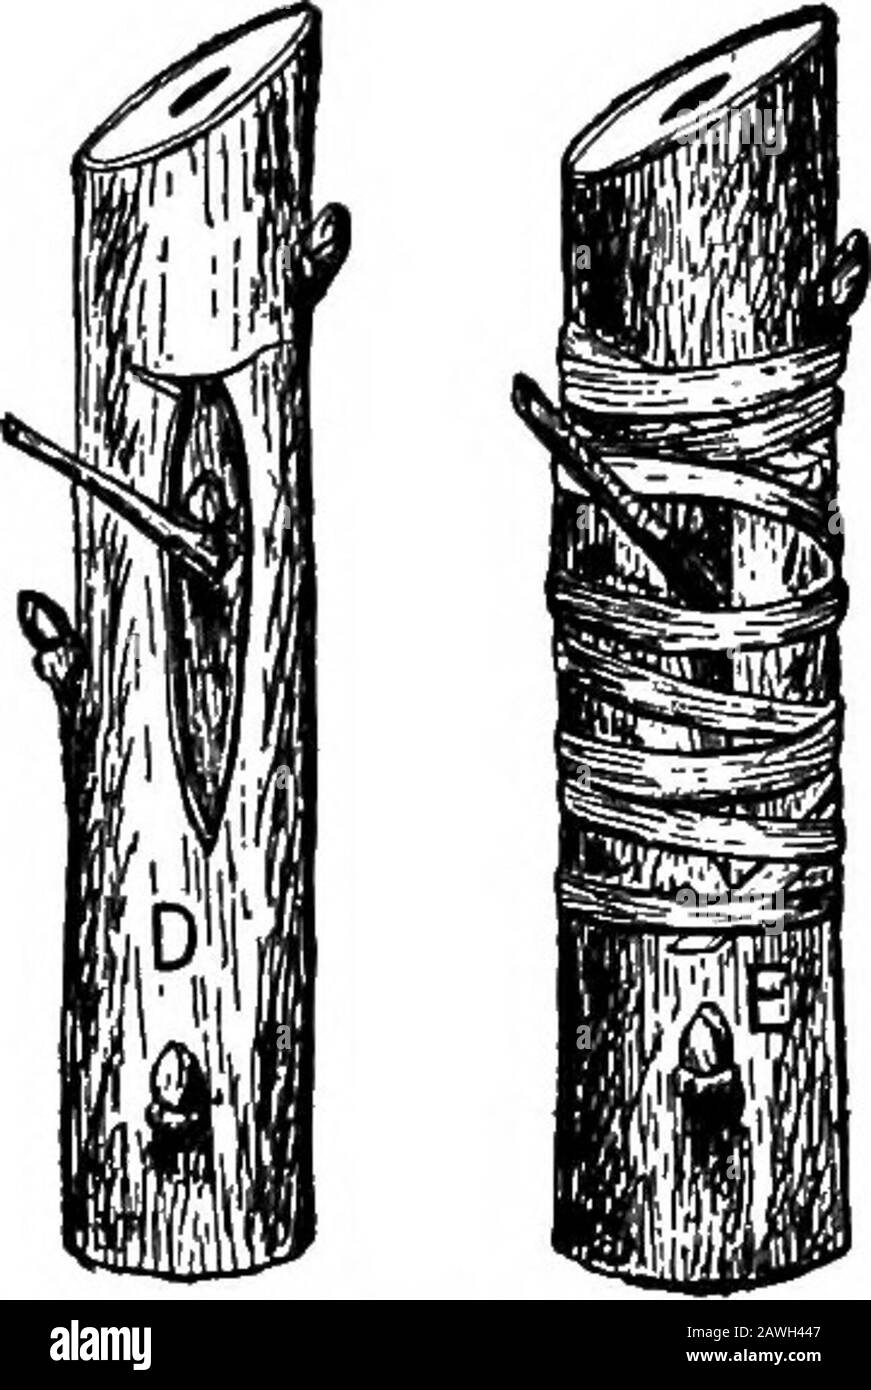 Productive farming . Fig. 18.—Method of budding a young fruit tree. A, the bud and surroundingparts cut from a good variety; B, the T-shaped cut in bark of tree to be budded;C« the same rolled back ready to receive the good bud; D. the good bud set in placeunder bark; E, the bud and bark tied securely in place with waxed knitting cottonor with raffia fiber. Peach and plum scions or budding sticks are cut fromthe new growth on the trees of the desired varieties. Theleaves are trimmed off, but stems are left near each bud toaid in handling when the bud is removed from the scion.The buds are inse Stock Photo